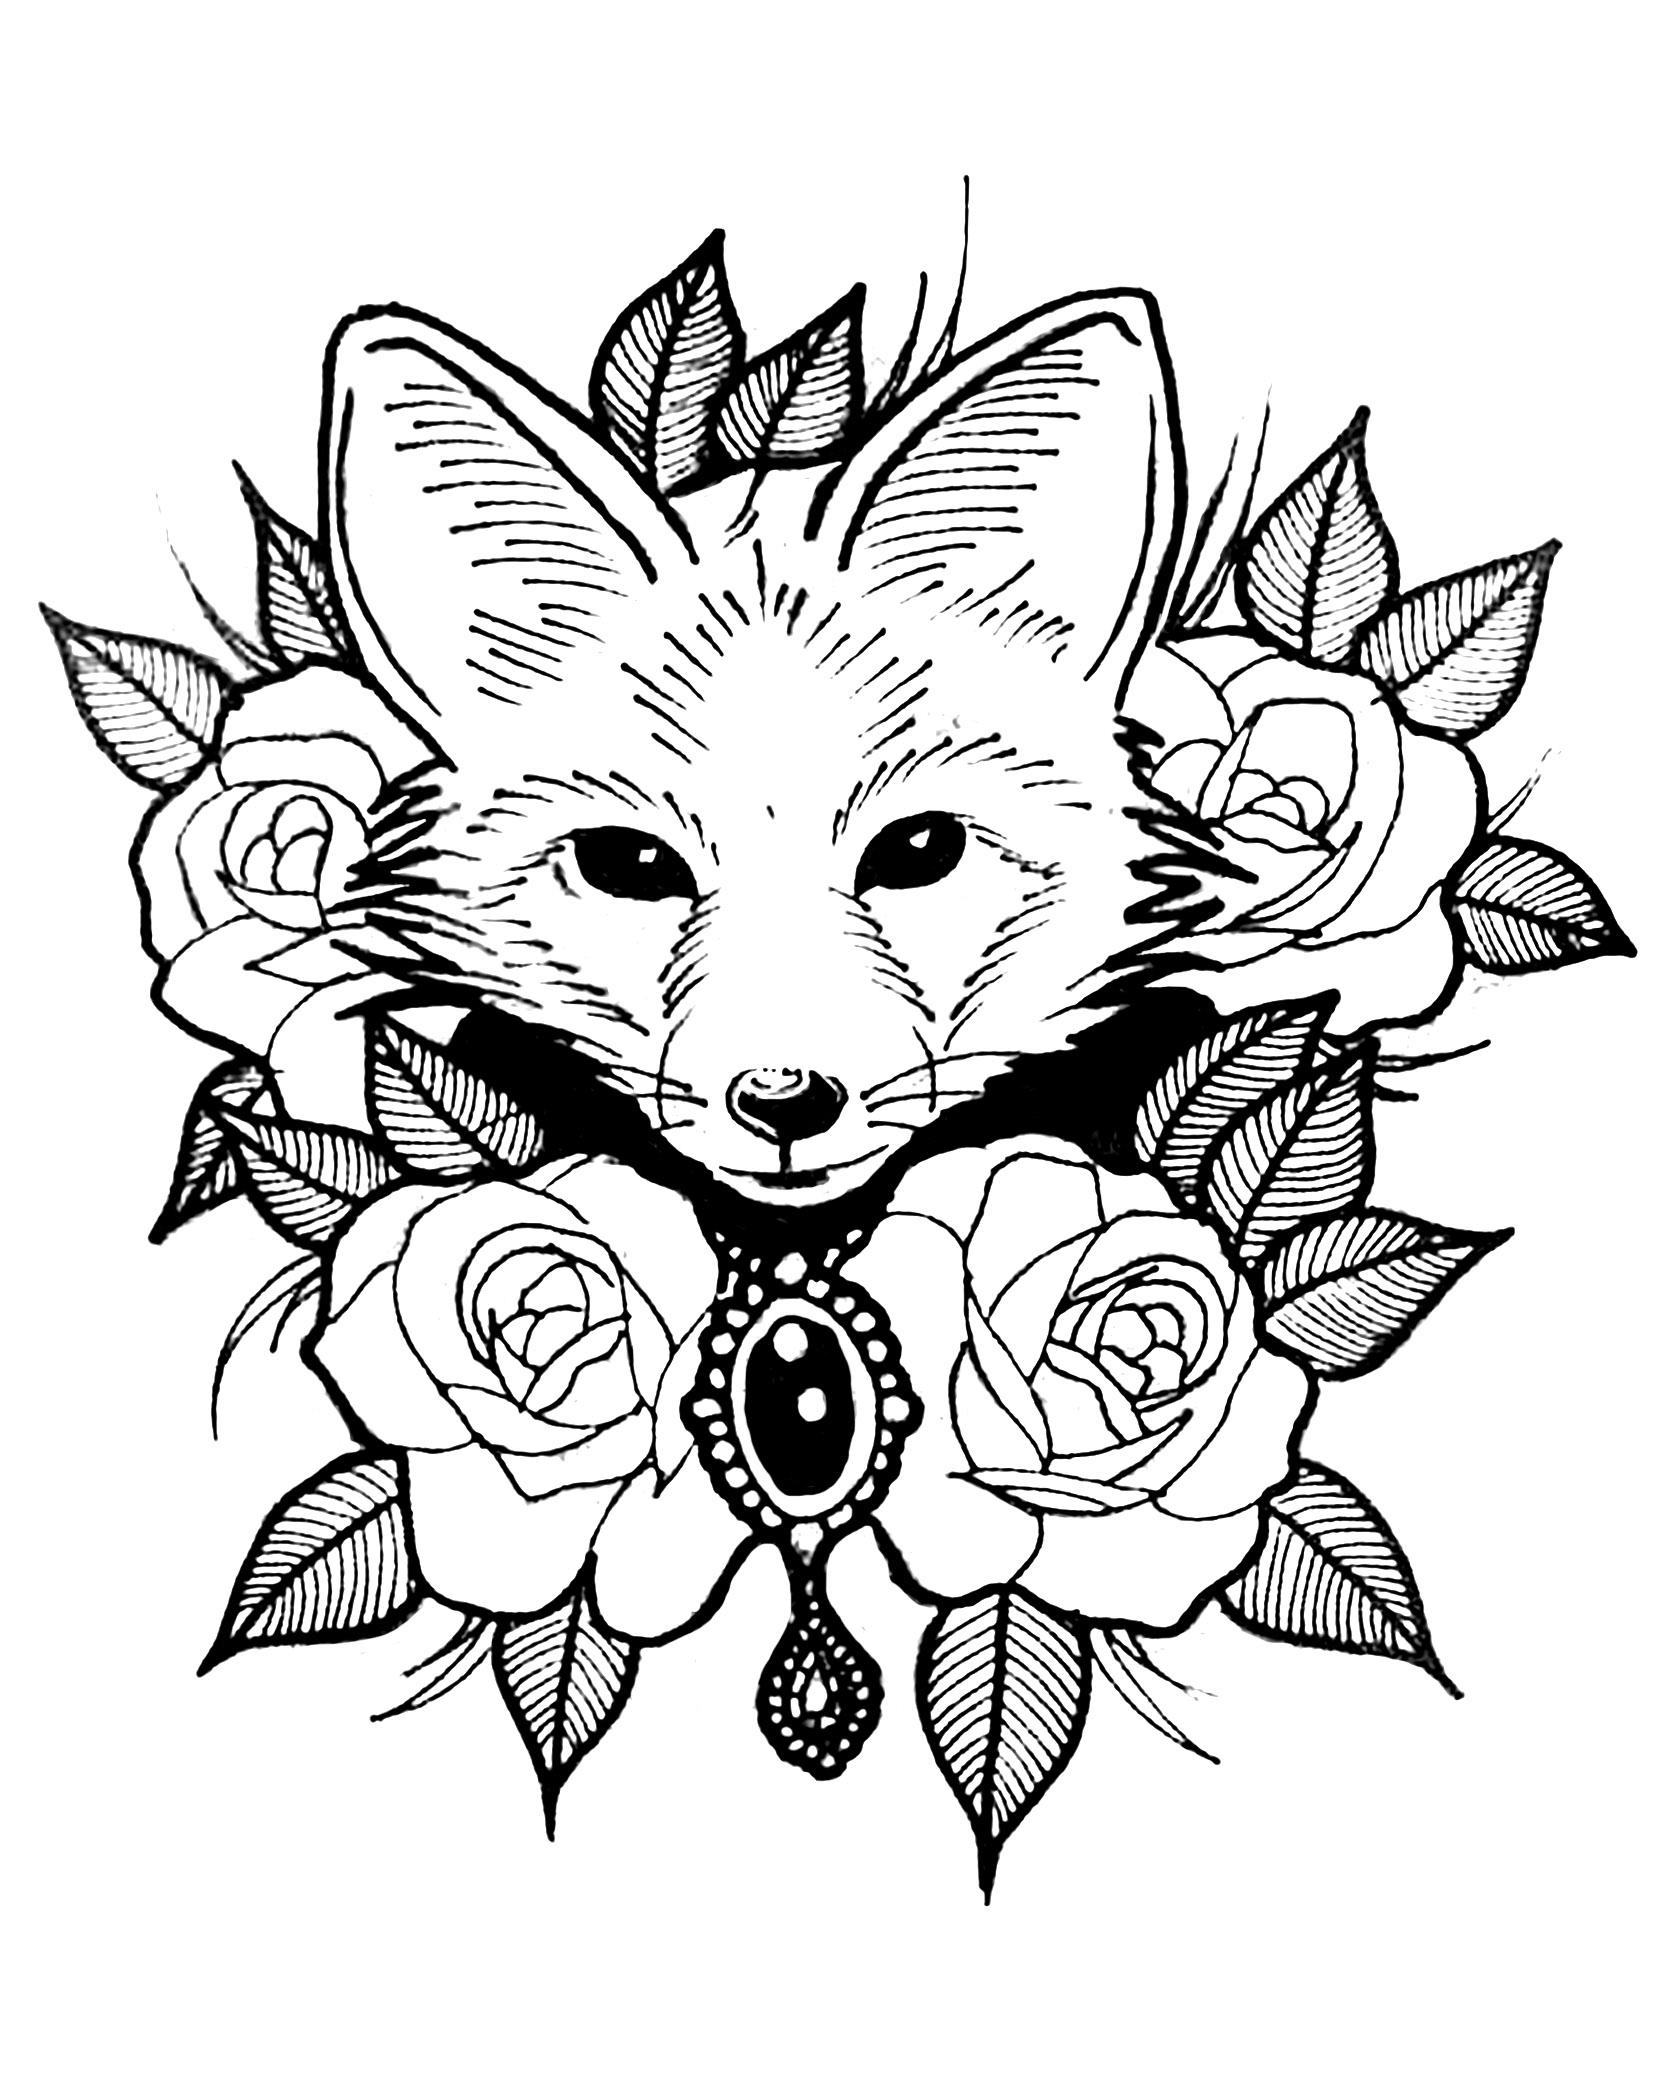 Fox to color for children - Fox Kids Coloring Pages